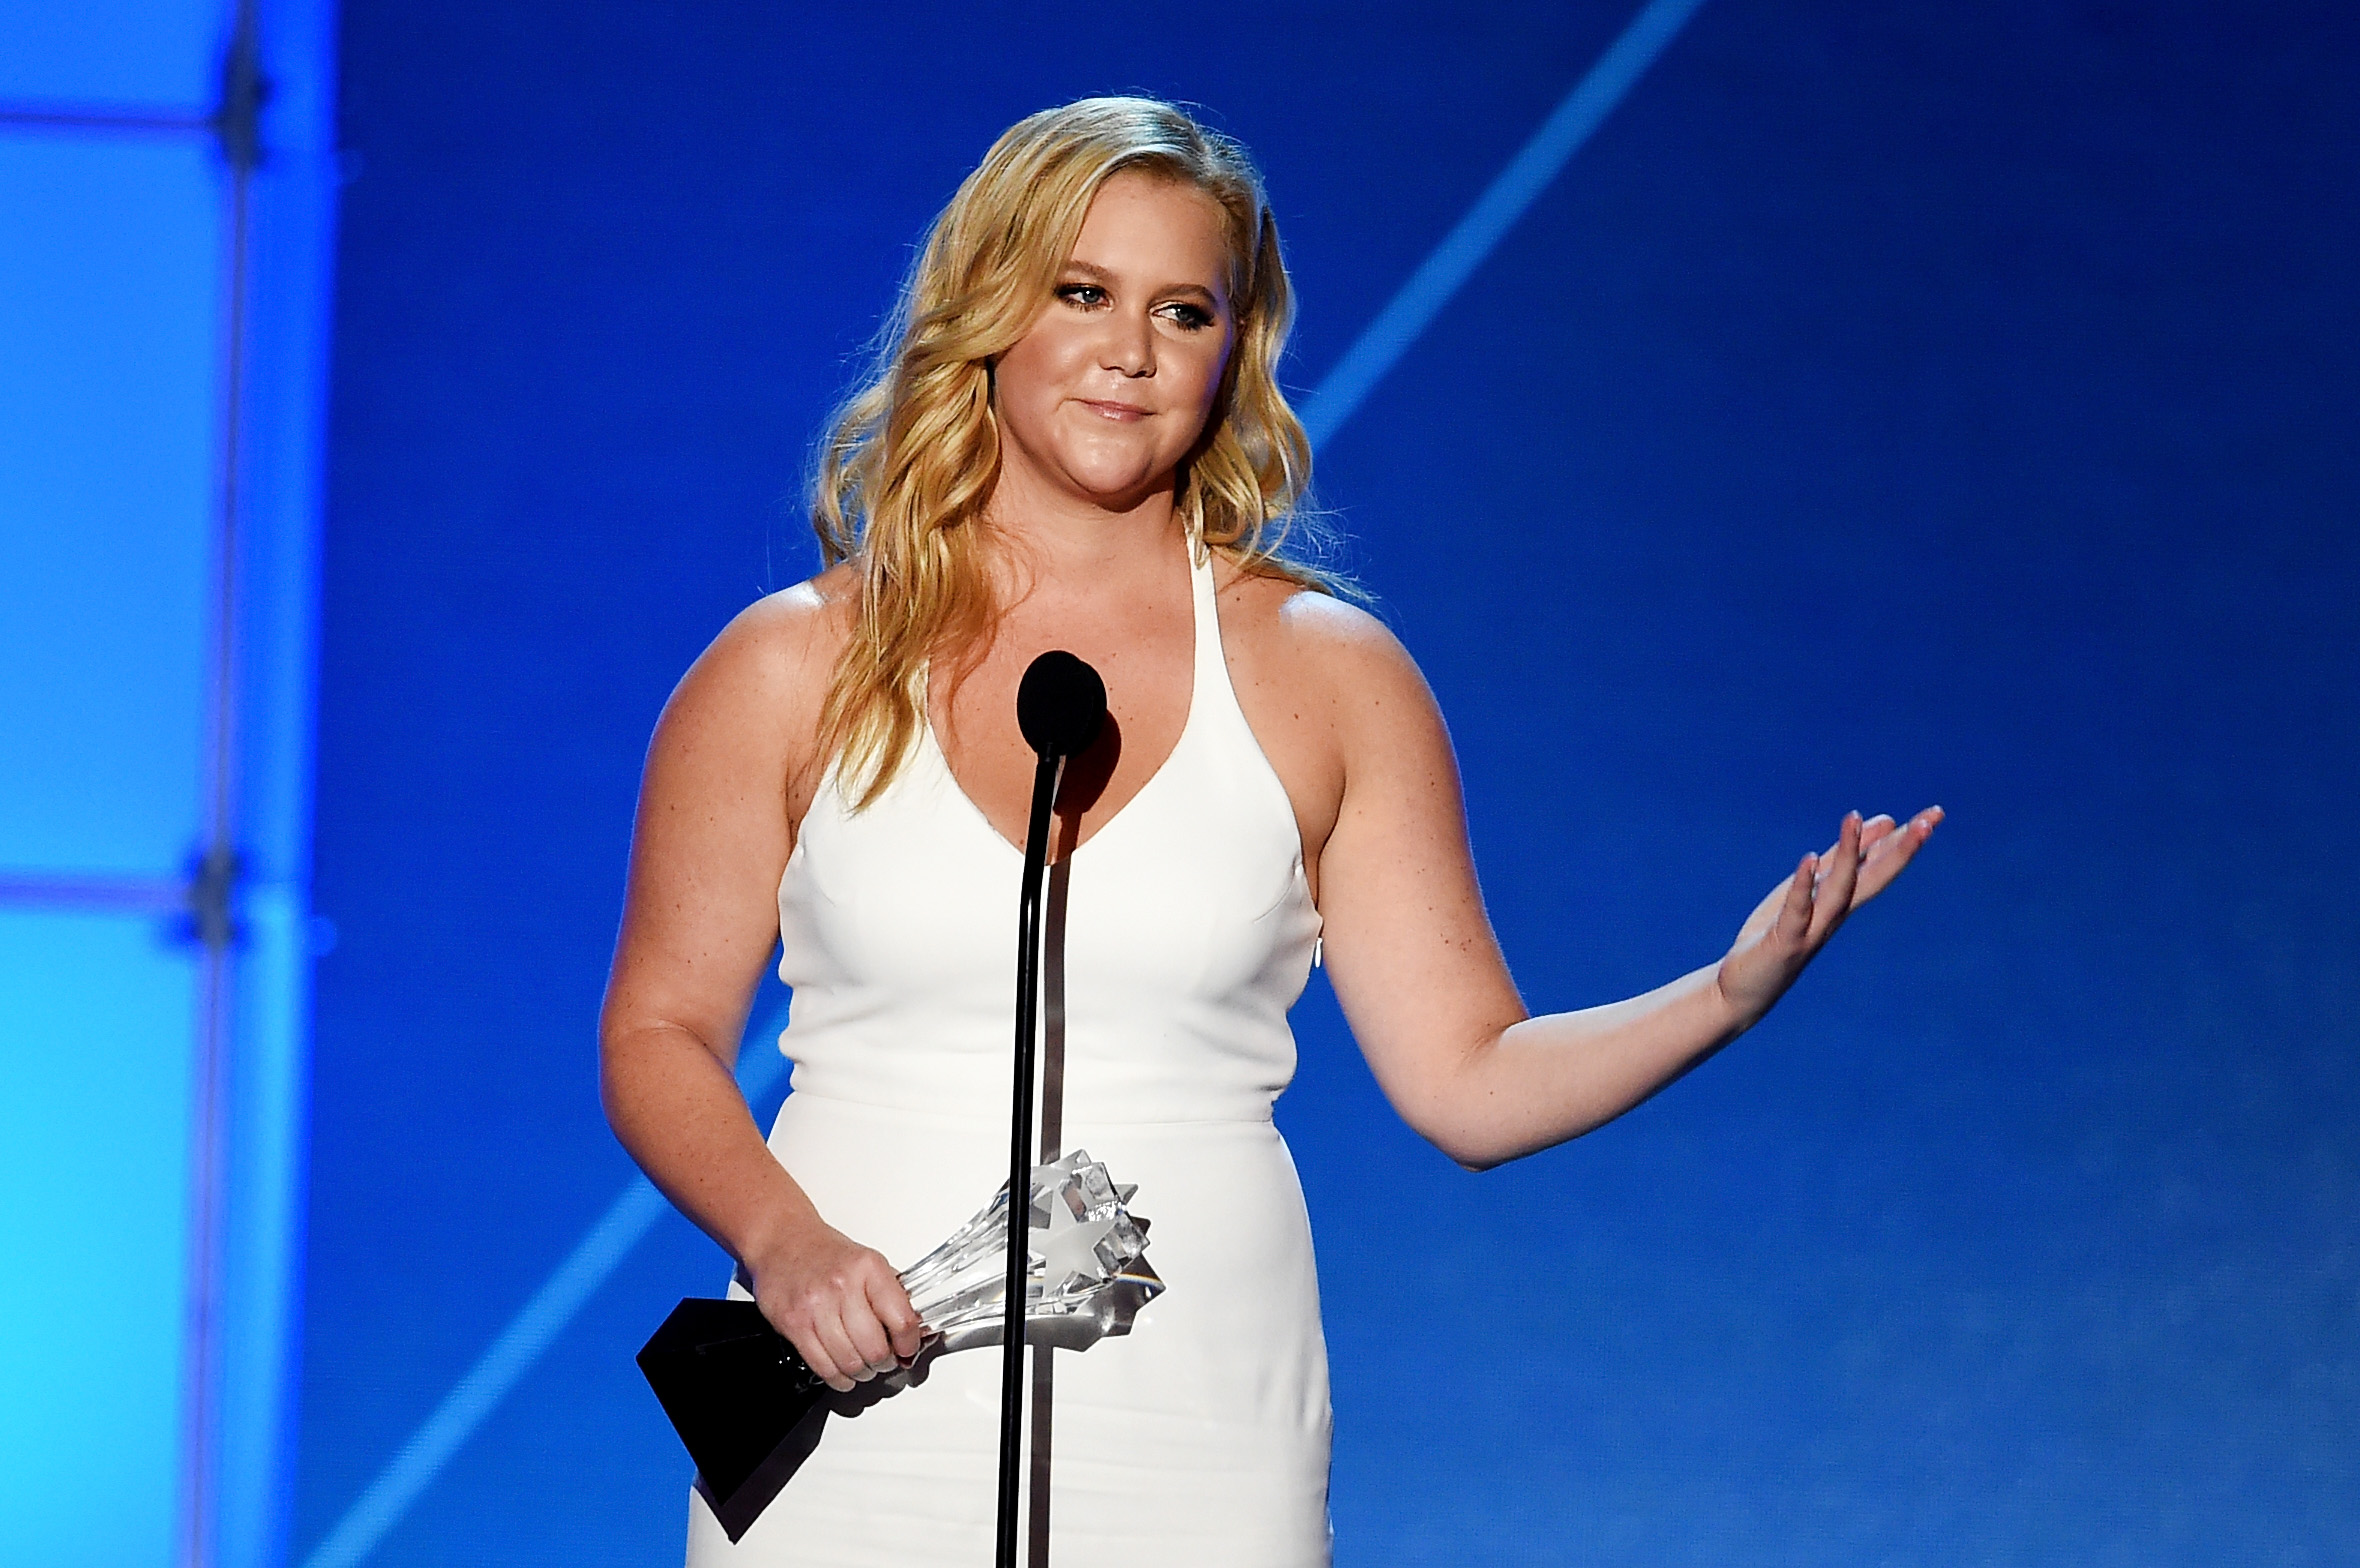 Actress-writer Amy Schumer accepts Critics' Choice MVP Award onstage during the 21st Annual Critics' Choice Awards at Barker Hangar on January 17, 2016 in Santa Monica, California. (Kevin Winter/Getty Images)